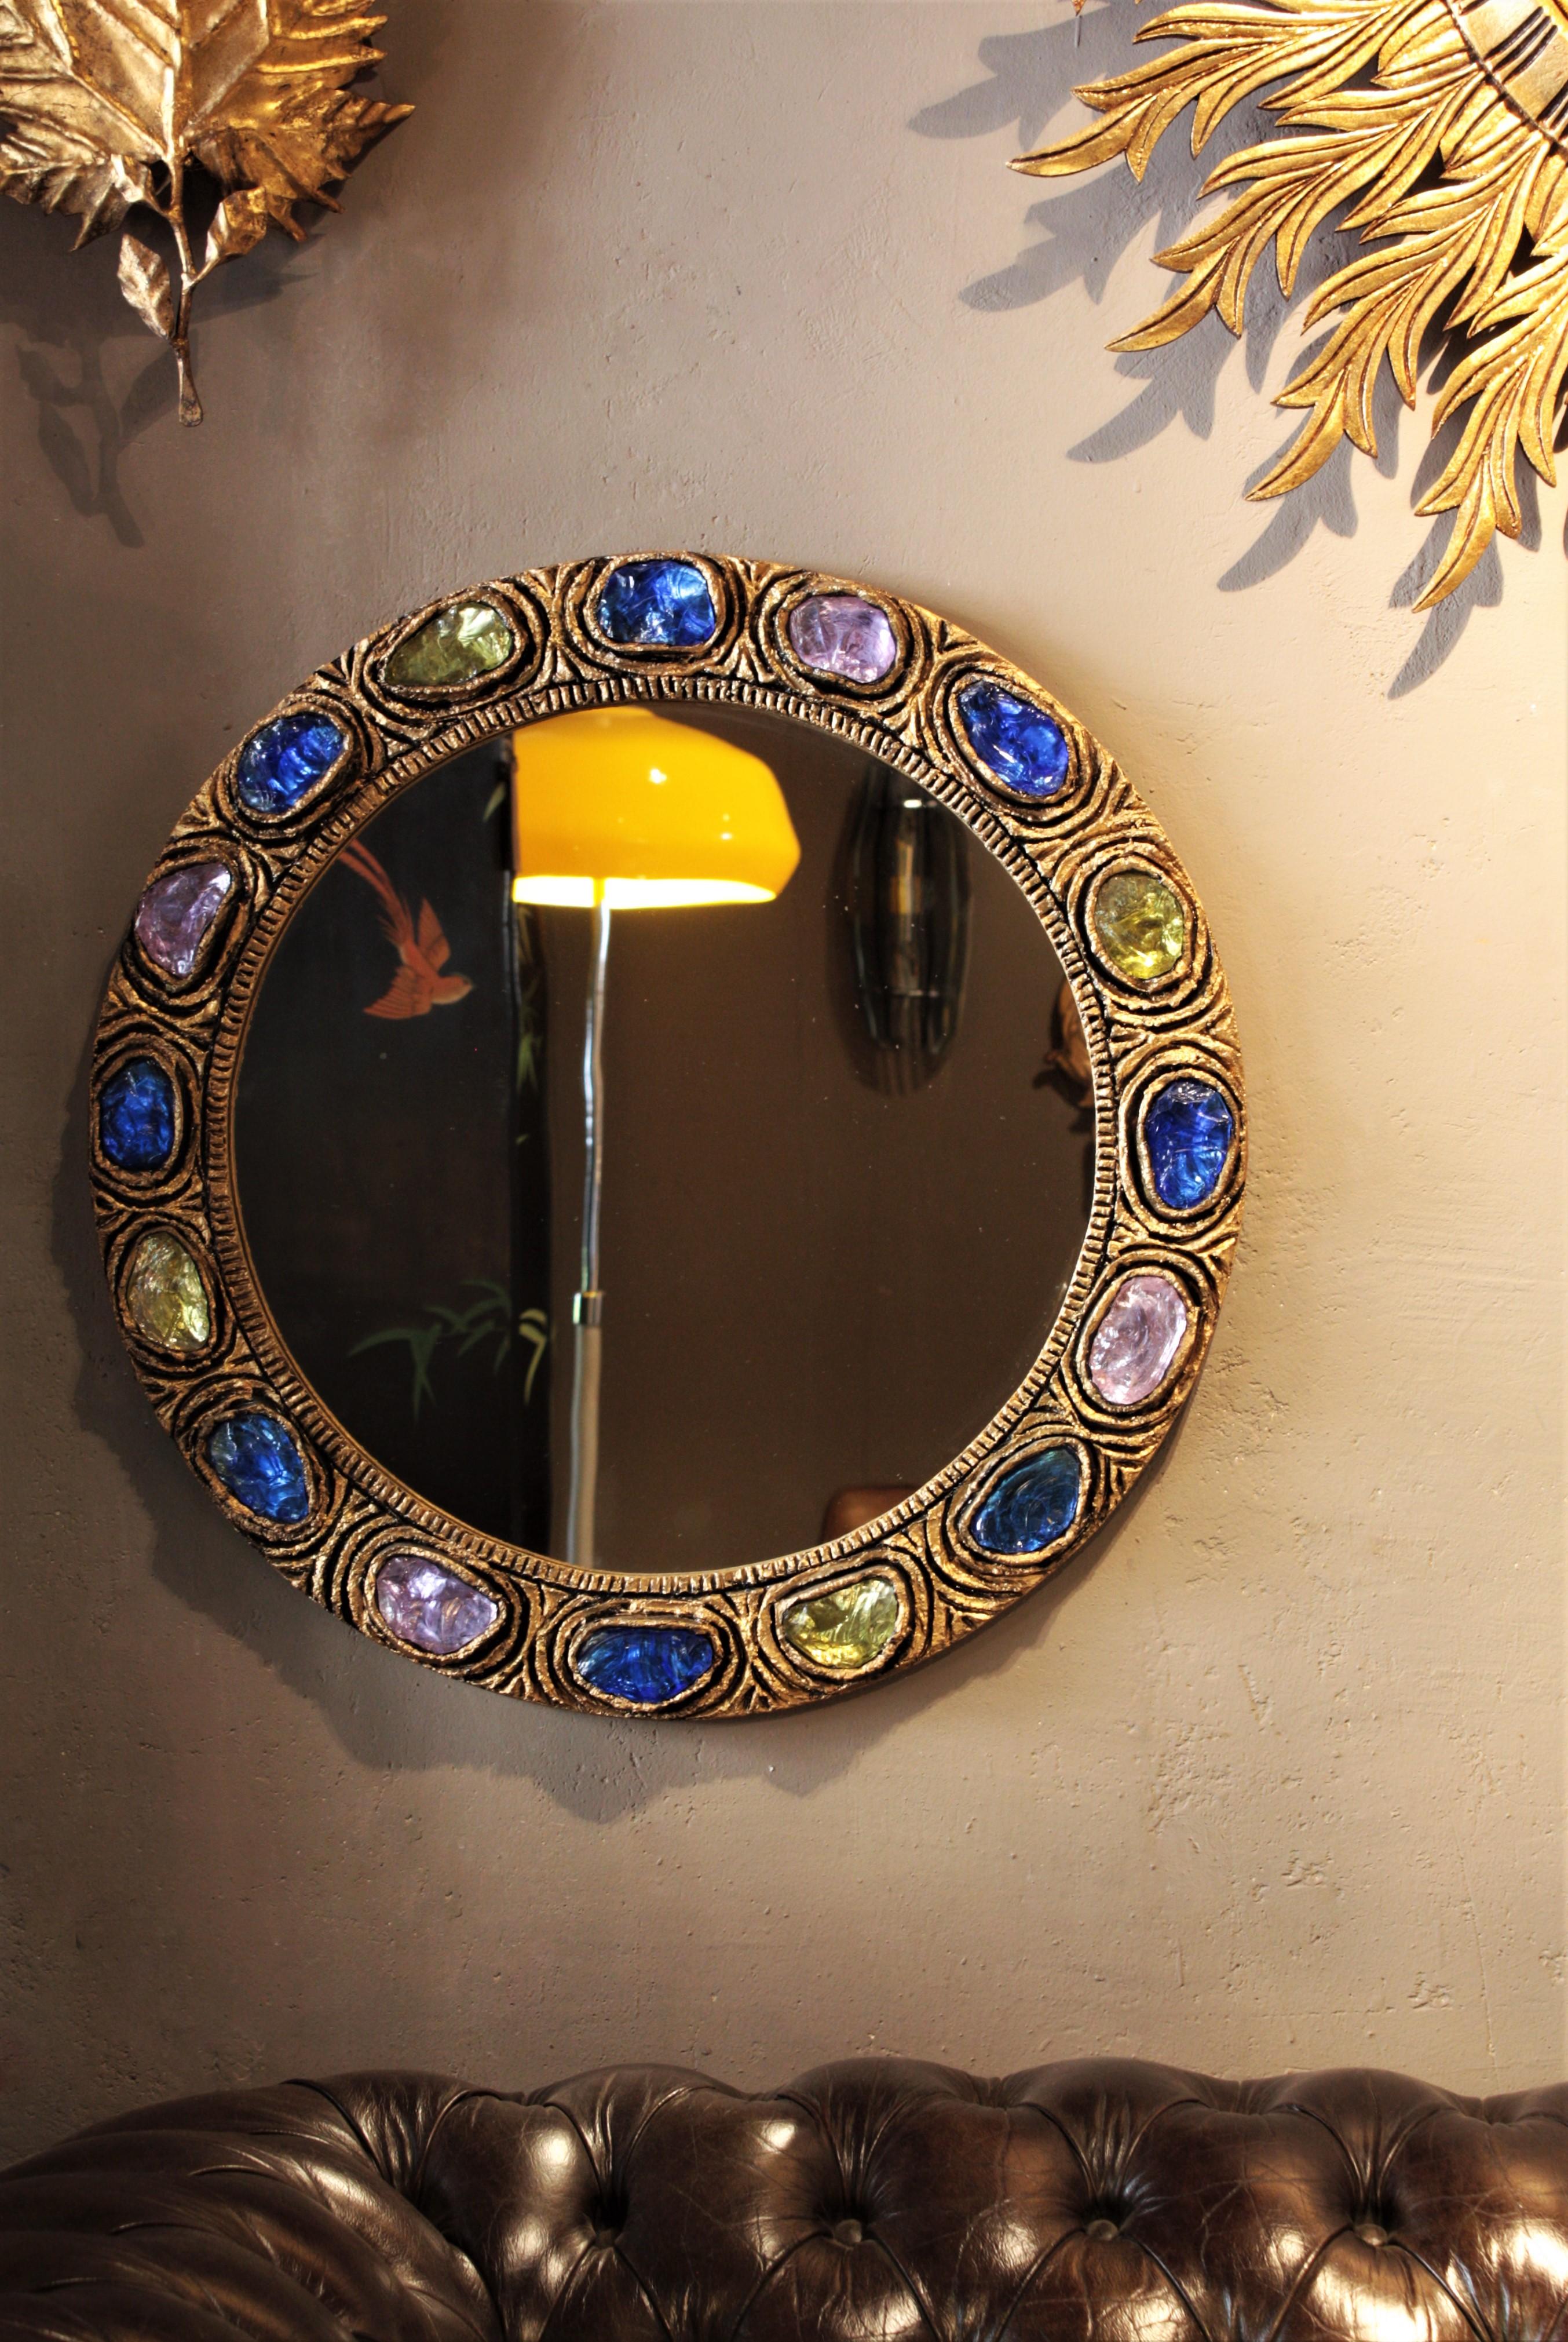 Spanish Round Wall Mirror with Blue, Yellow and Turquoise Rock Crystals